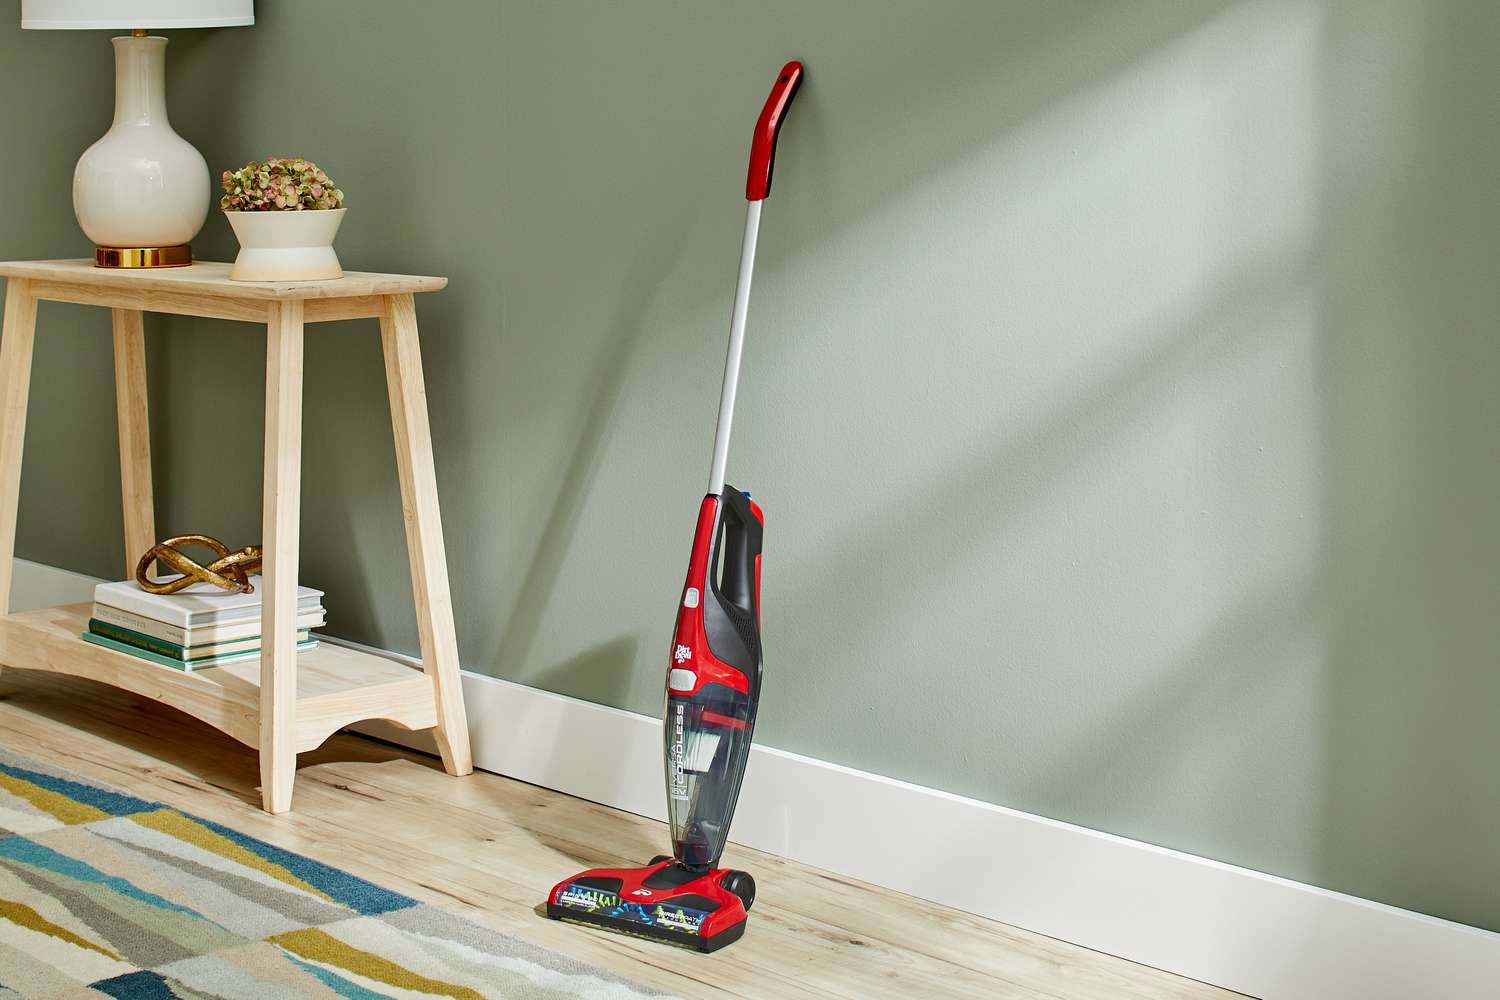 DirtDevil Versa Cordless 3-in-1 Stick Vacuum displayed in room next to carpet and stand with lamp